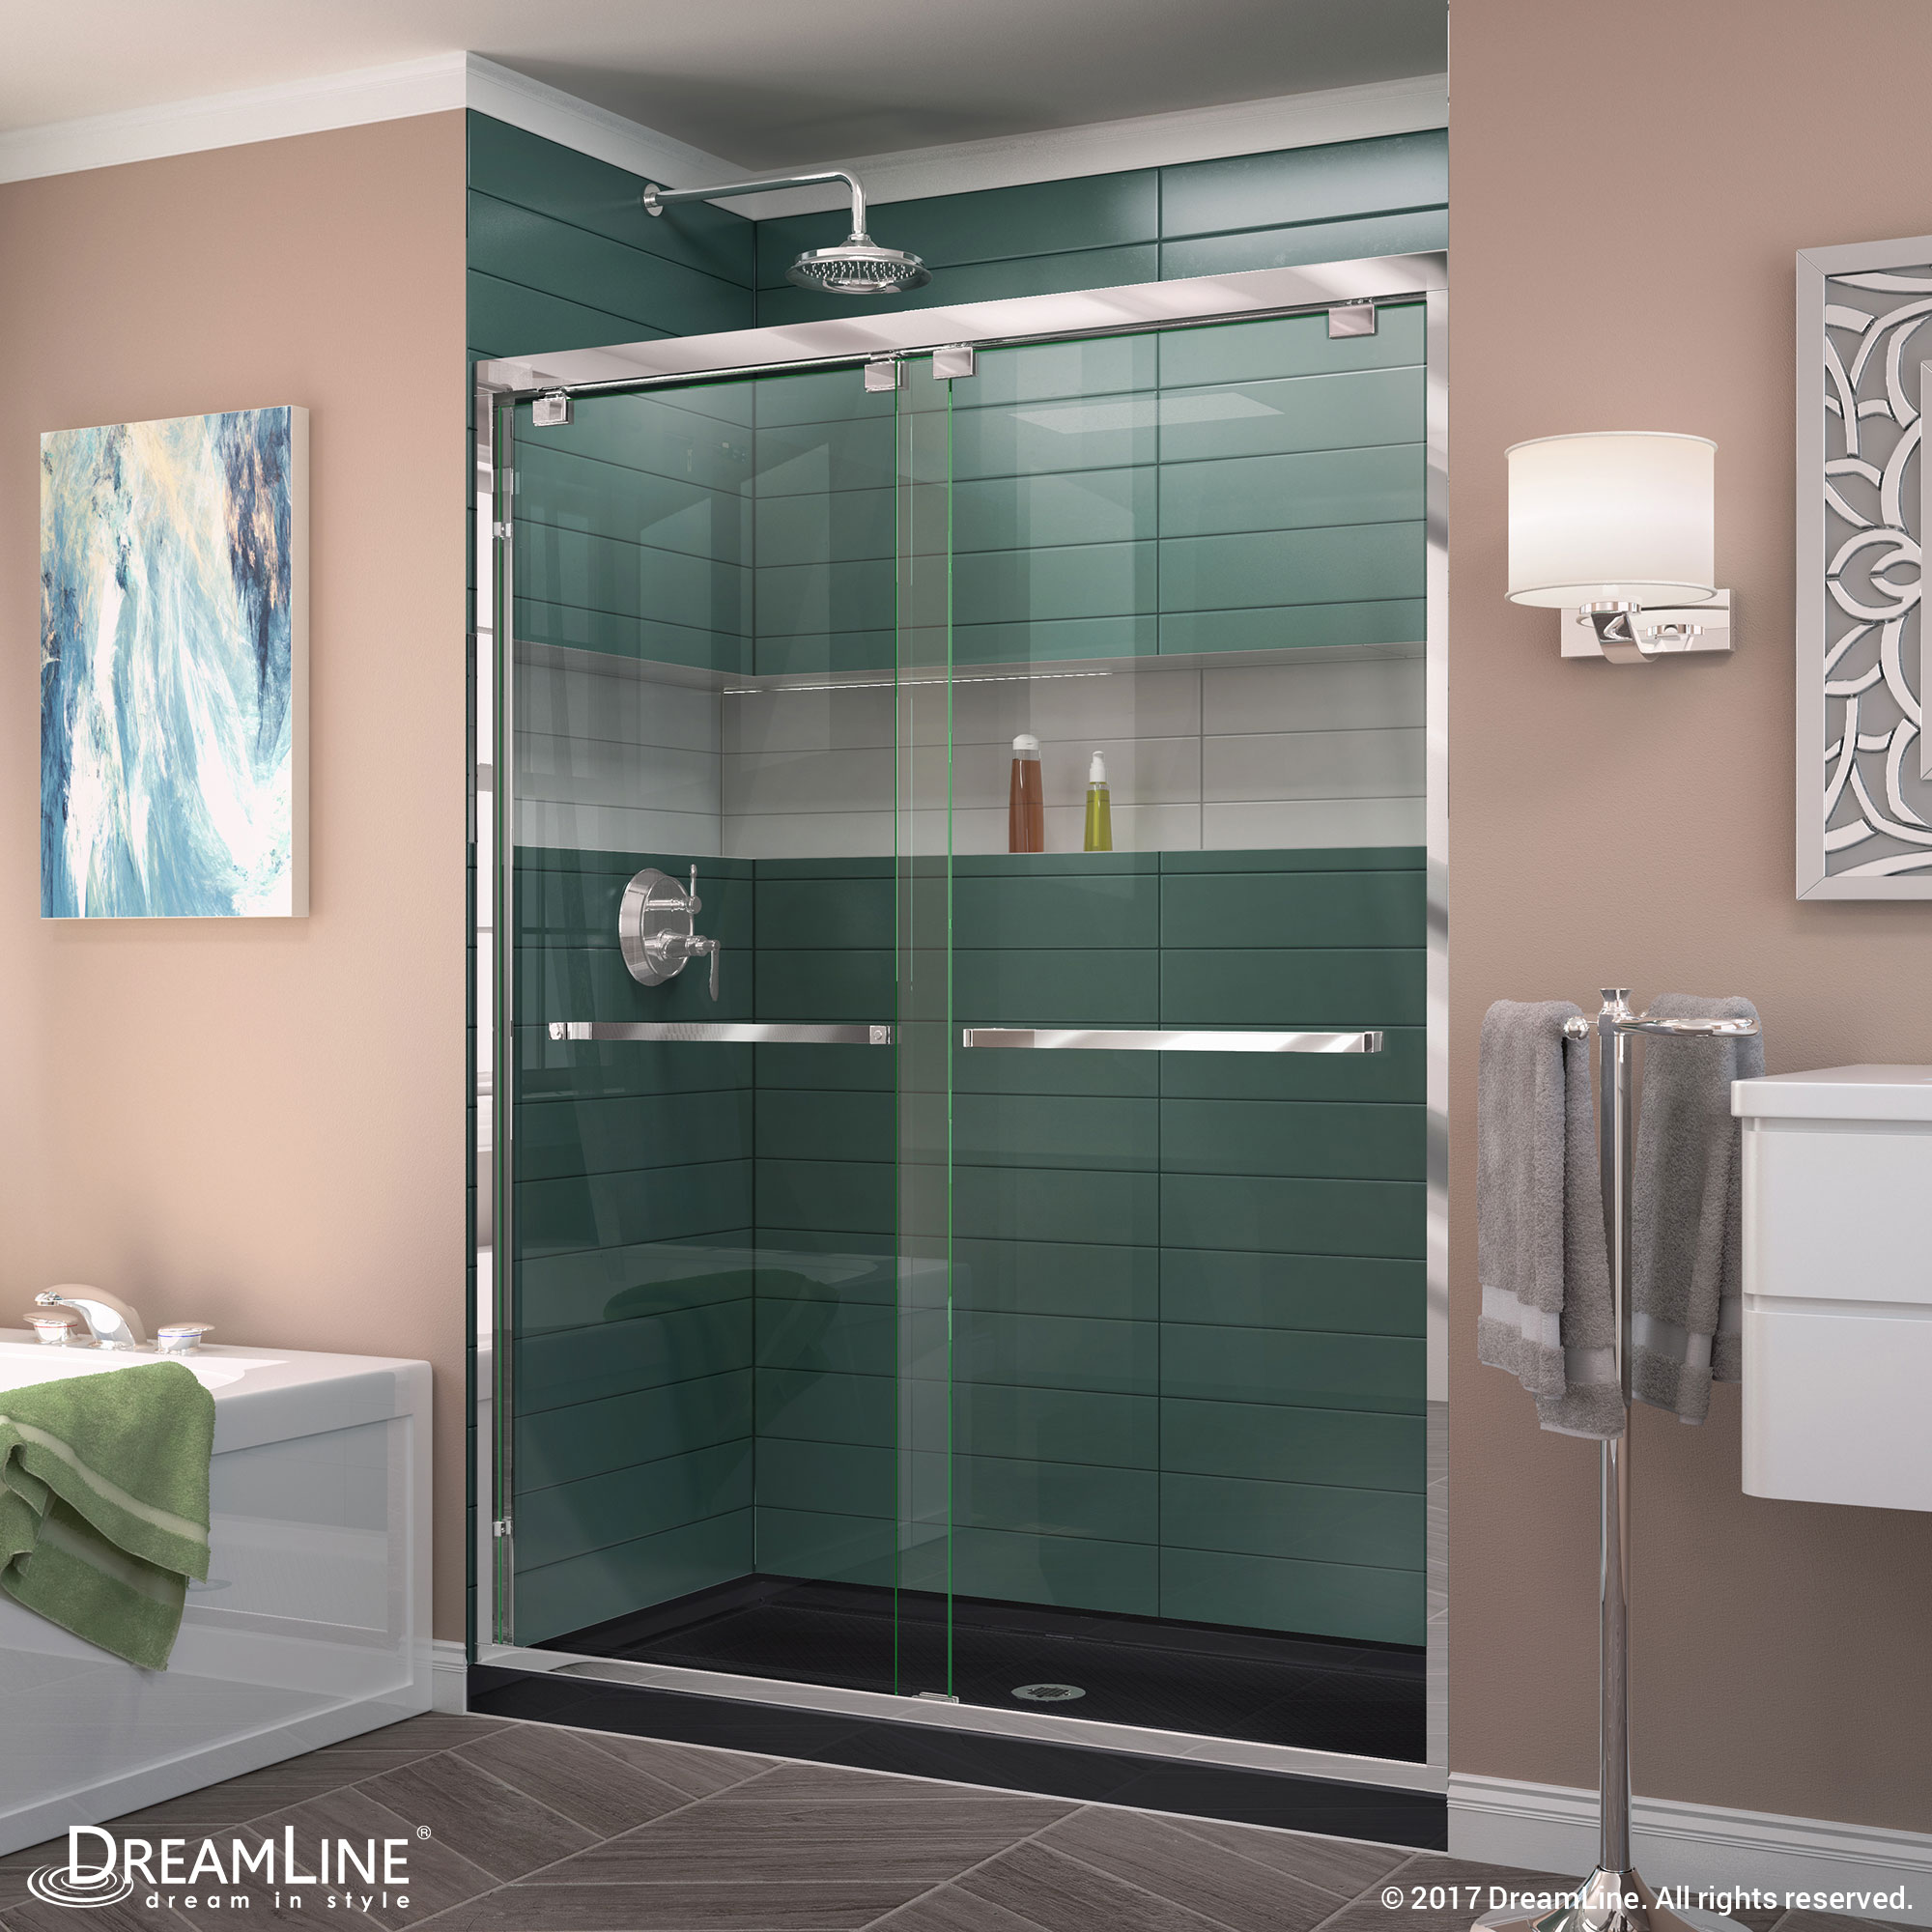 DreamLine Encore 34 in. D x 48 in. W x 78 3/4 in. H Bypass Shower Door in Chrome and Center Drain Biscuit Base Kit